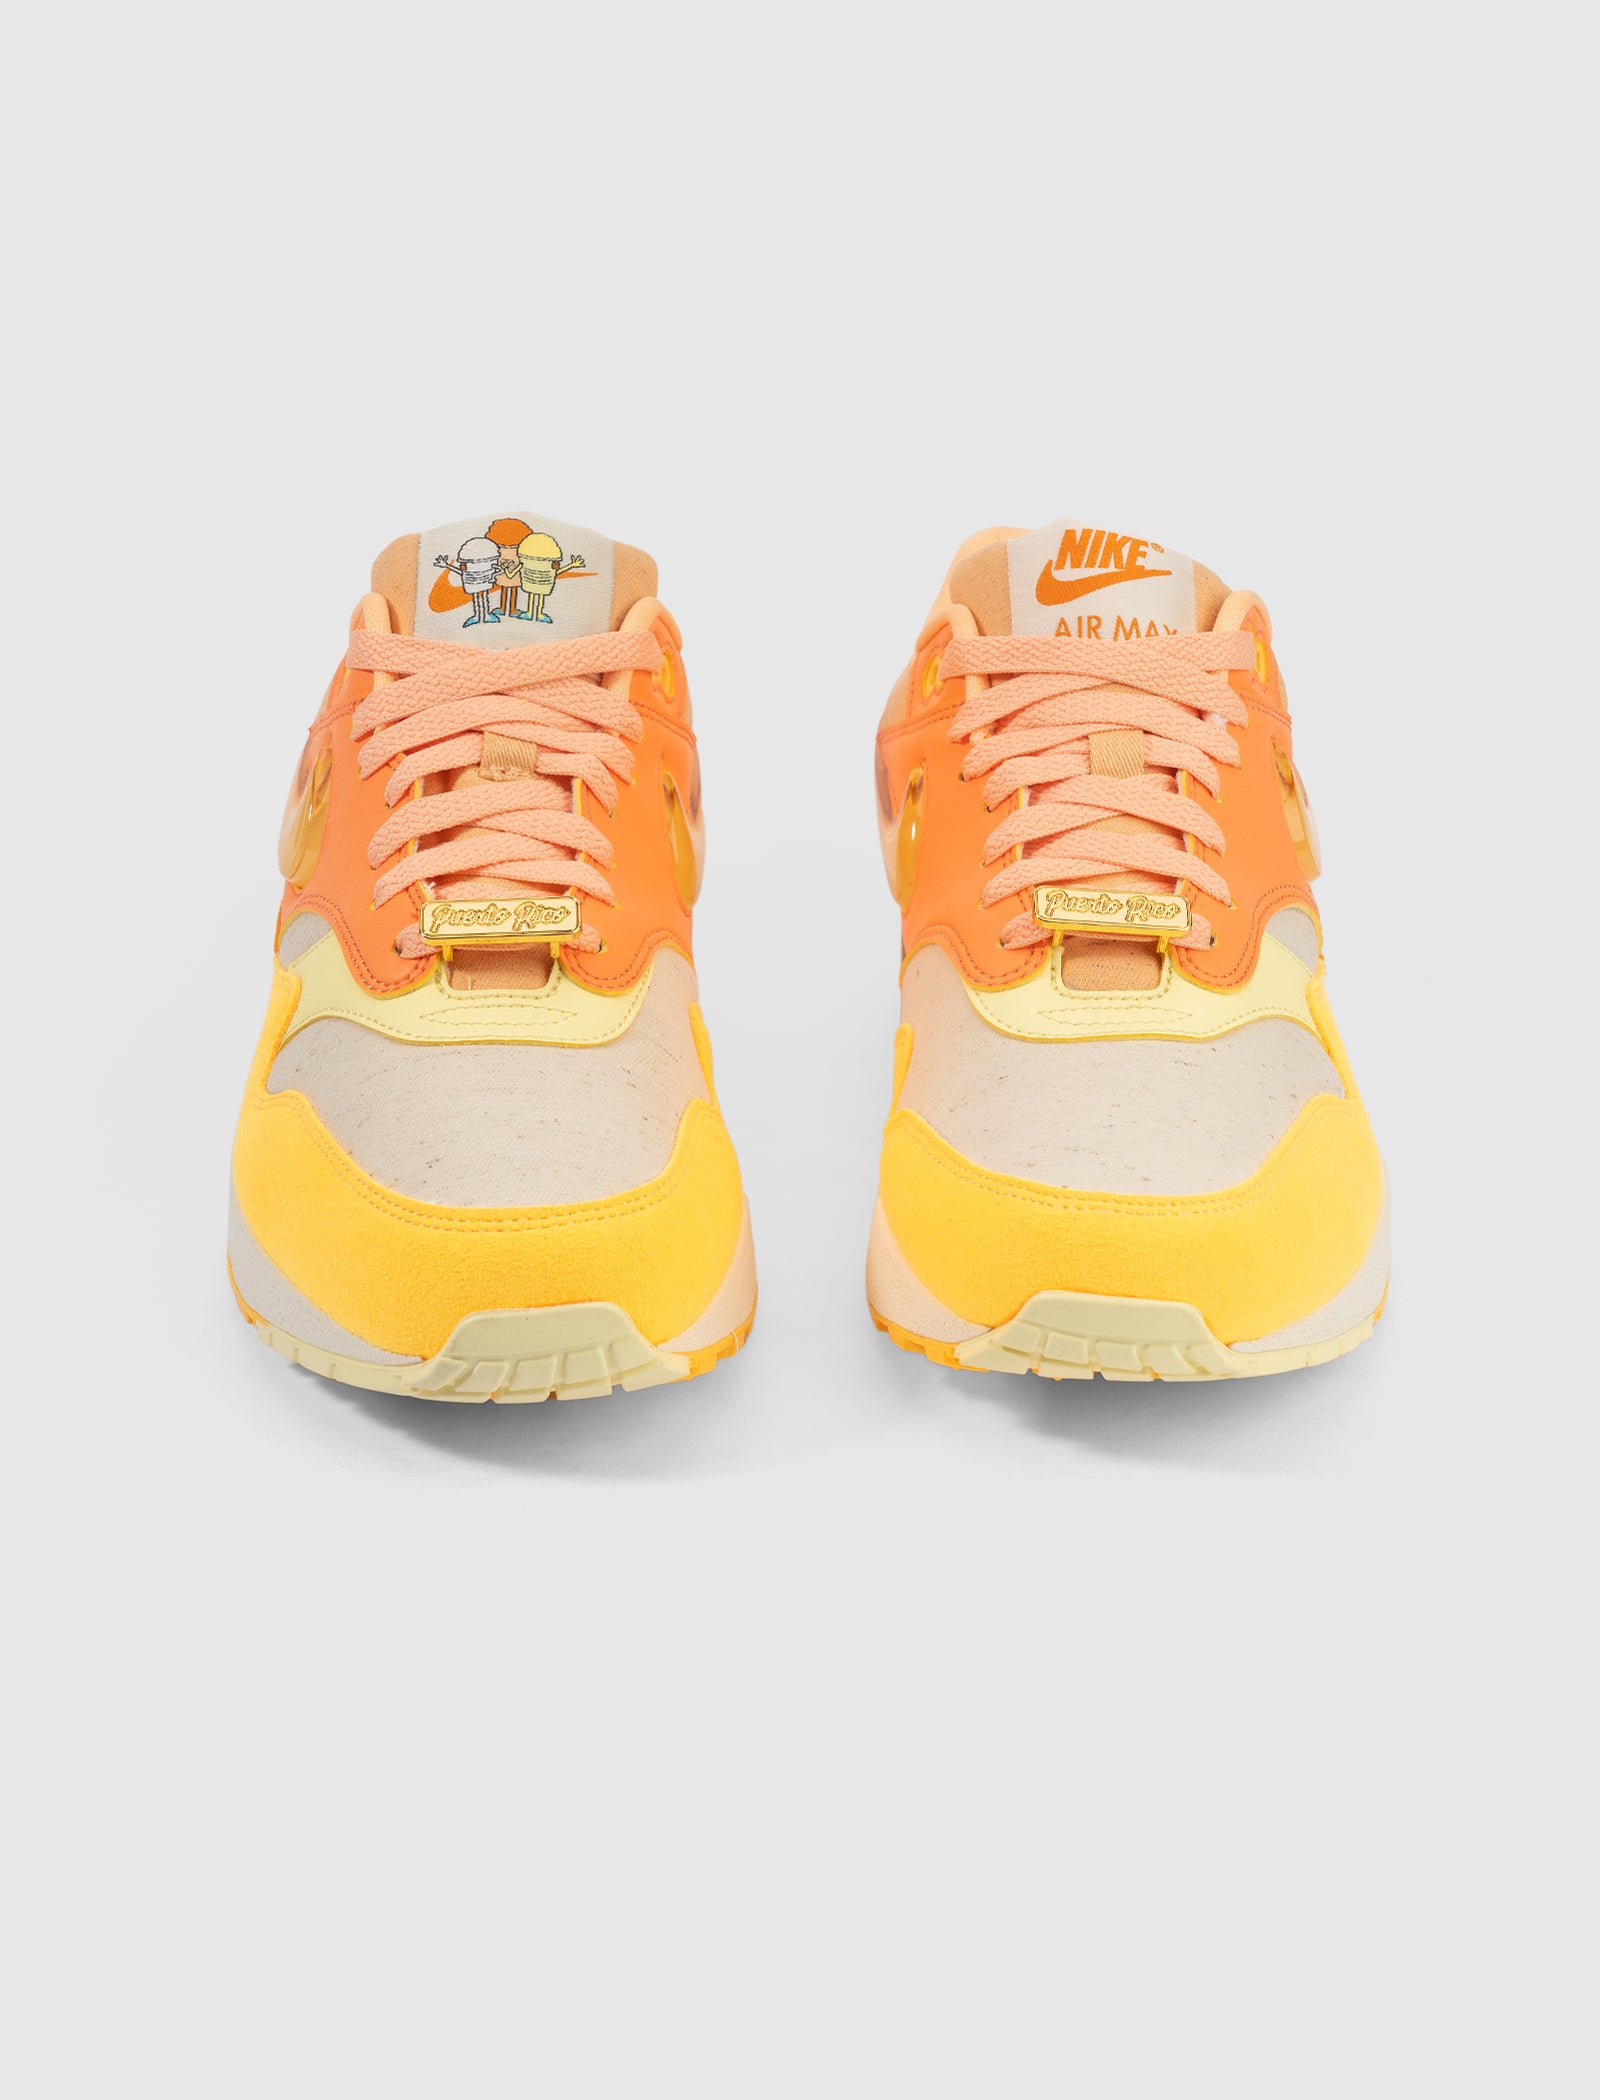 AIR MAX 1 PUERTO RICO DAY "ORANGE FROST"